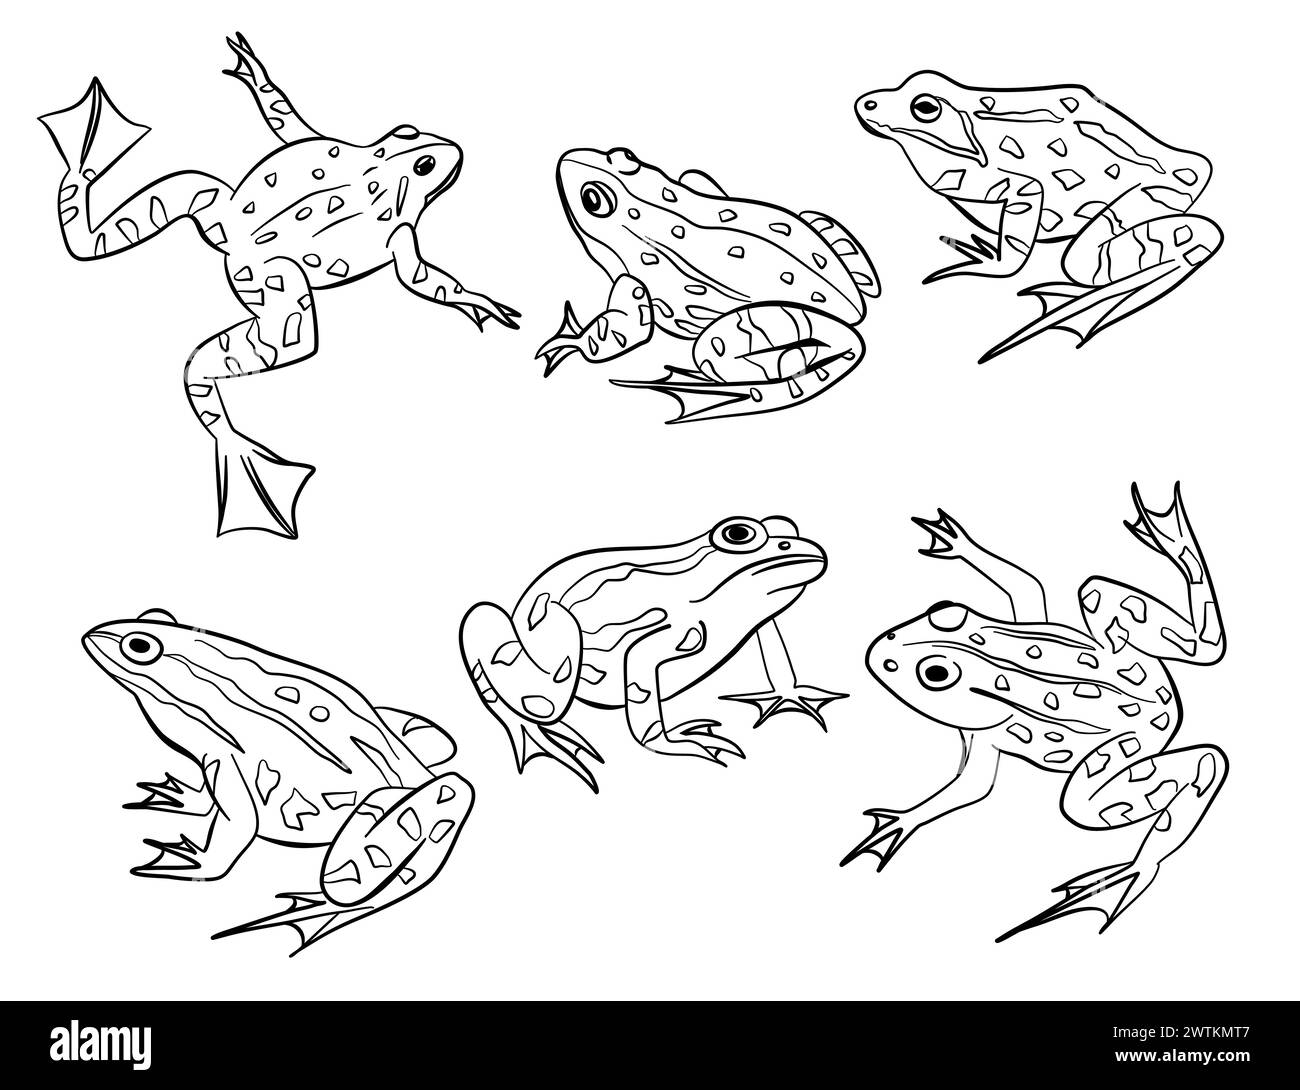 Frog outline actions illustration vector collection. Set of six reptile animals Stock Vector